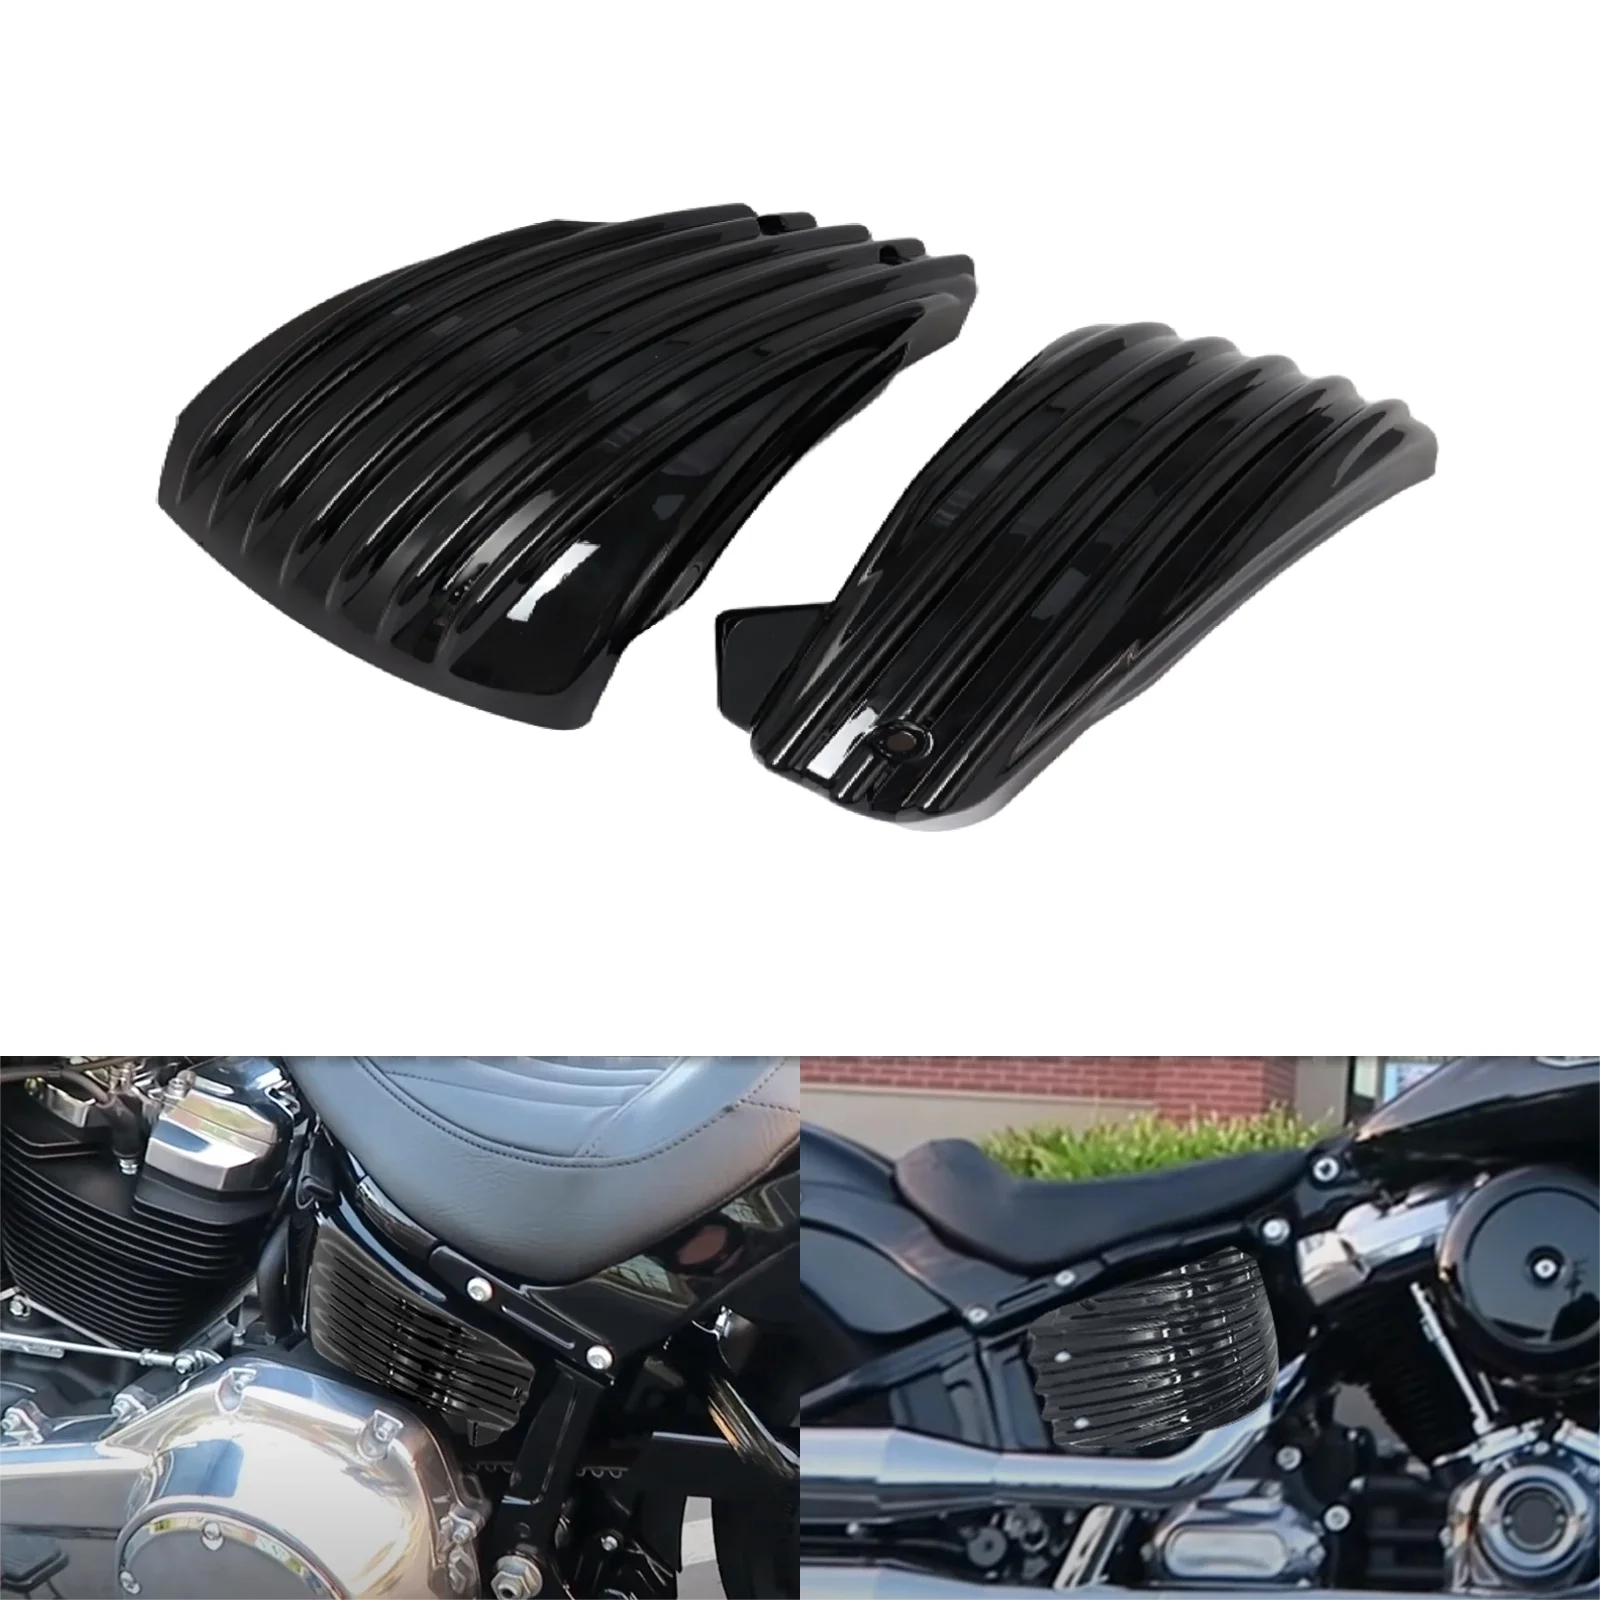 

2xMotorcycle ABS Stripe Battery Side Covers Fairing For Harley Softail Fat Boy Breakout Street Bob FXDR FXSB FLSTF 2018-2022